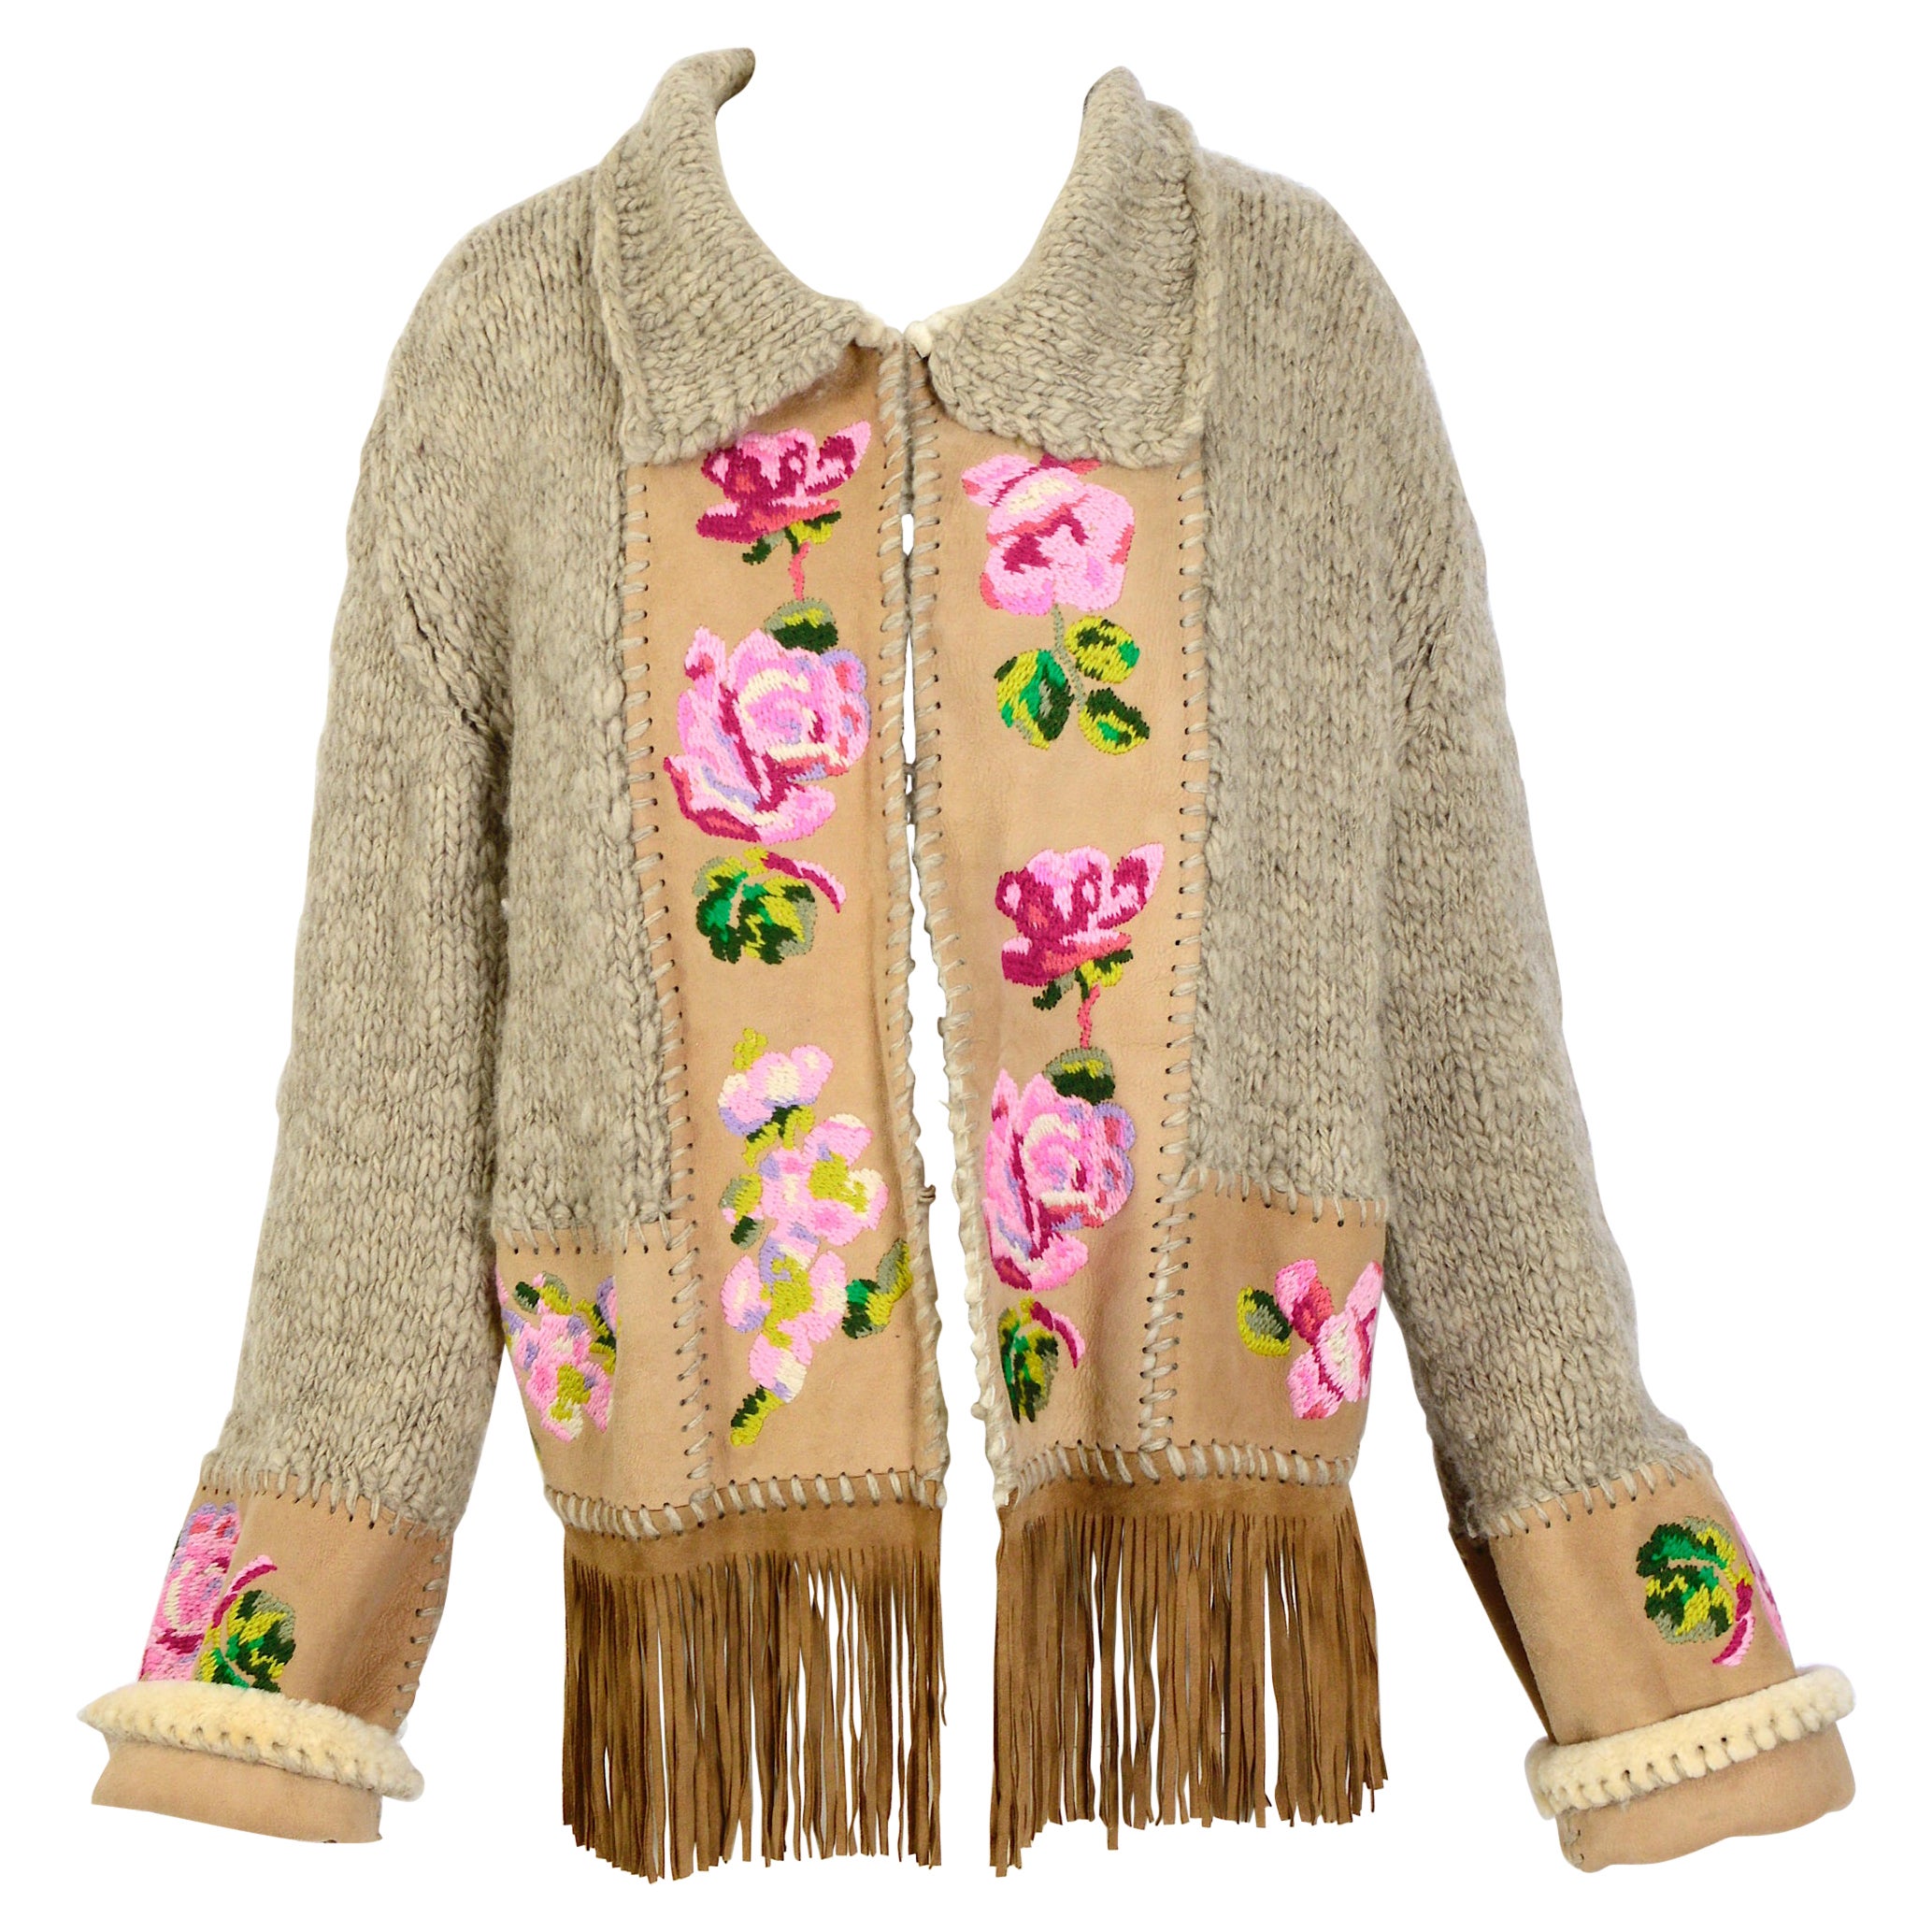 Christian Dior by John Galliano vintage fall 2000 embroidered fringed cardigan   For Sale